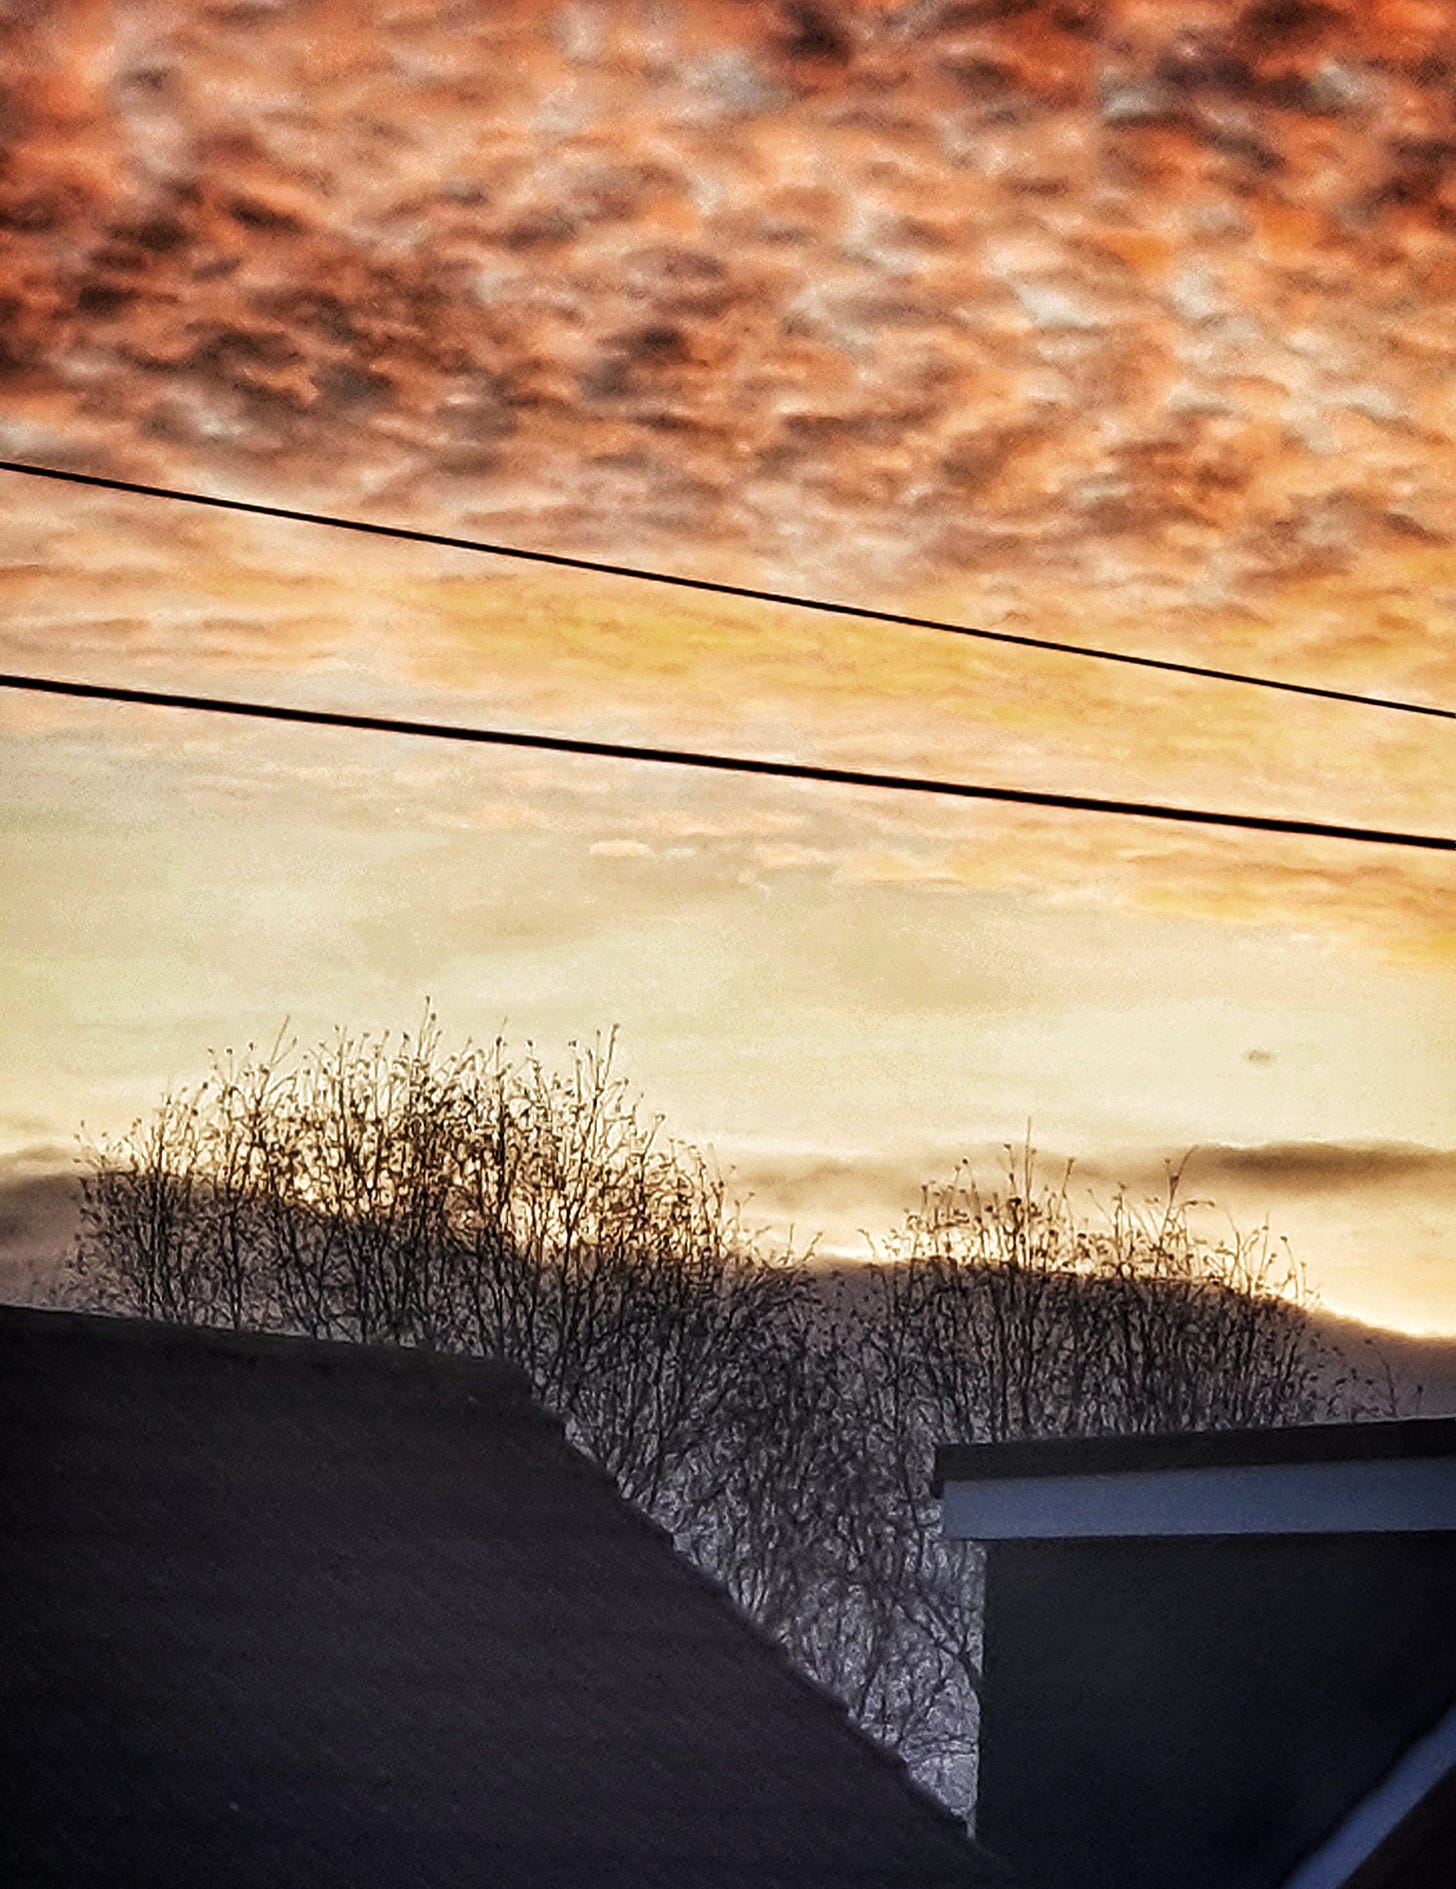 A heart shaped tree between the roof tops. Set against an early morning sky of oranges and yellows. A winter image